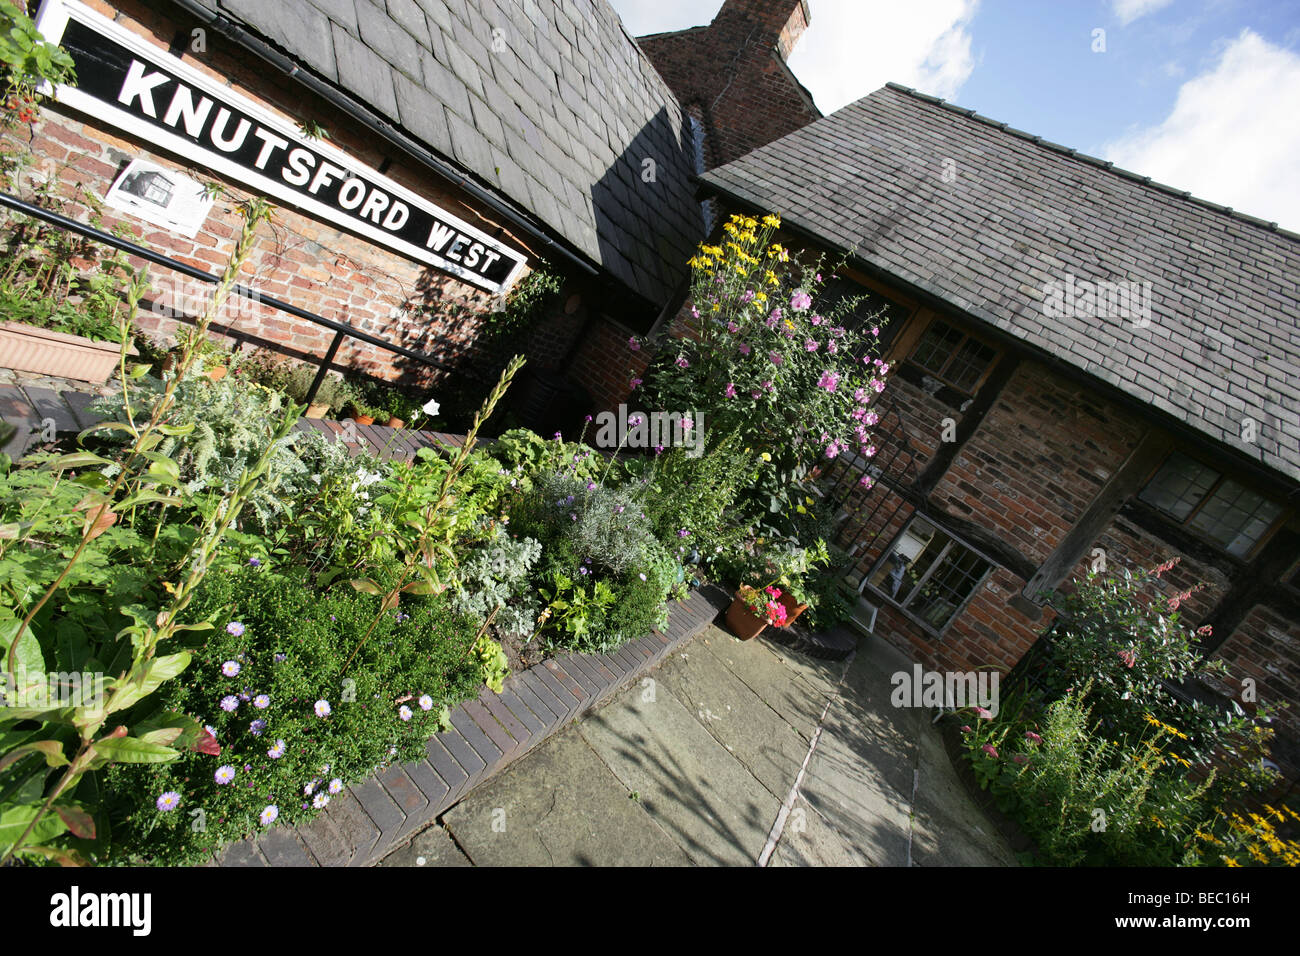 Town of Knutsford, England. Rear garden and elevation of the Heritage Centre. Stock Photo